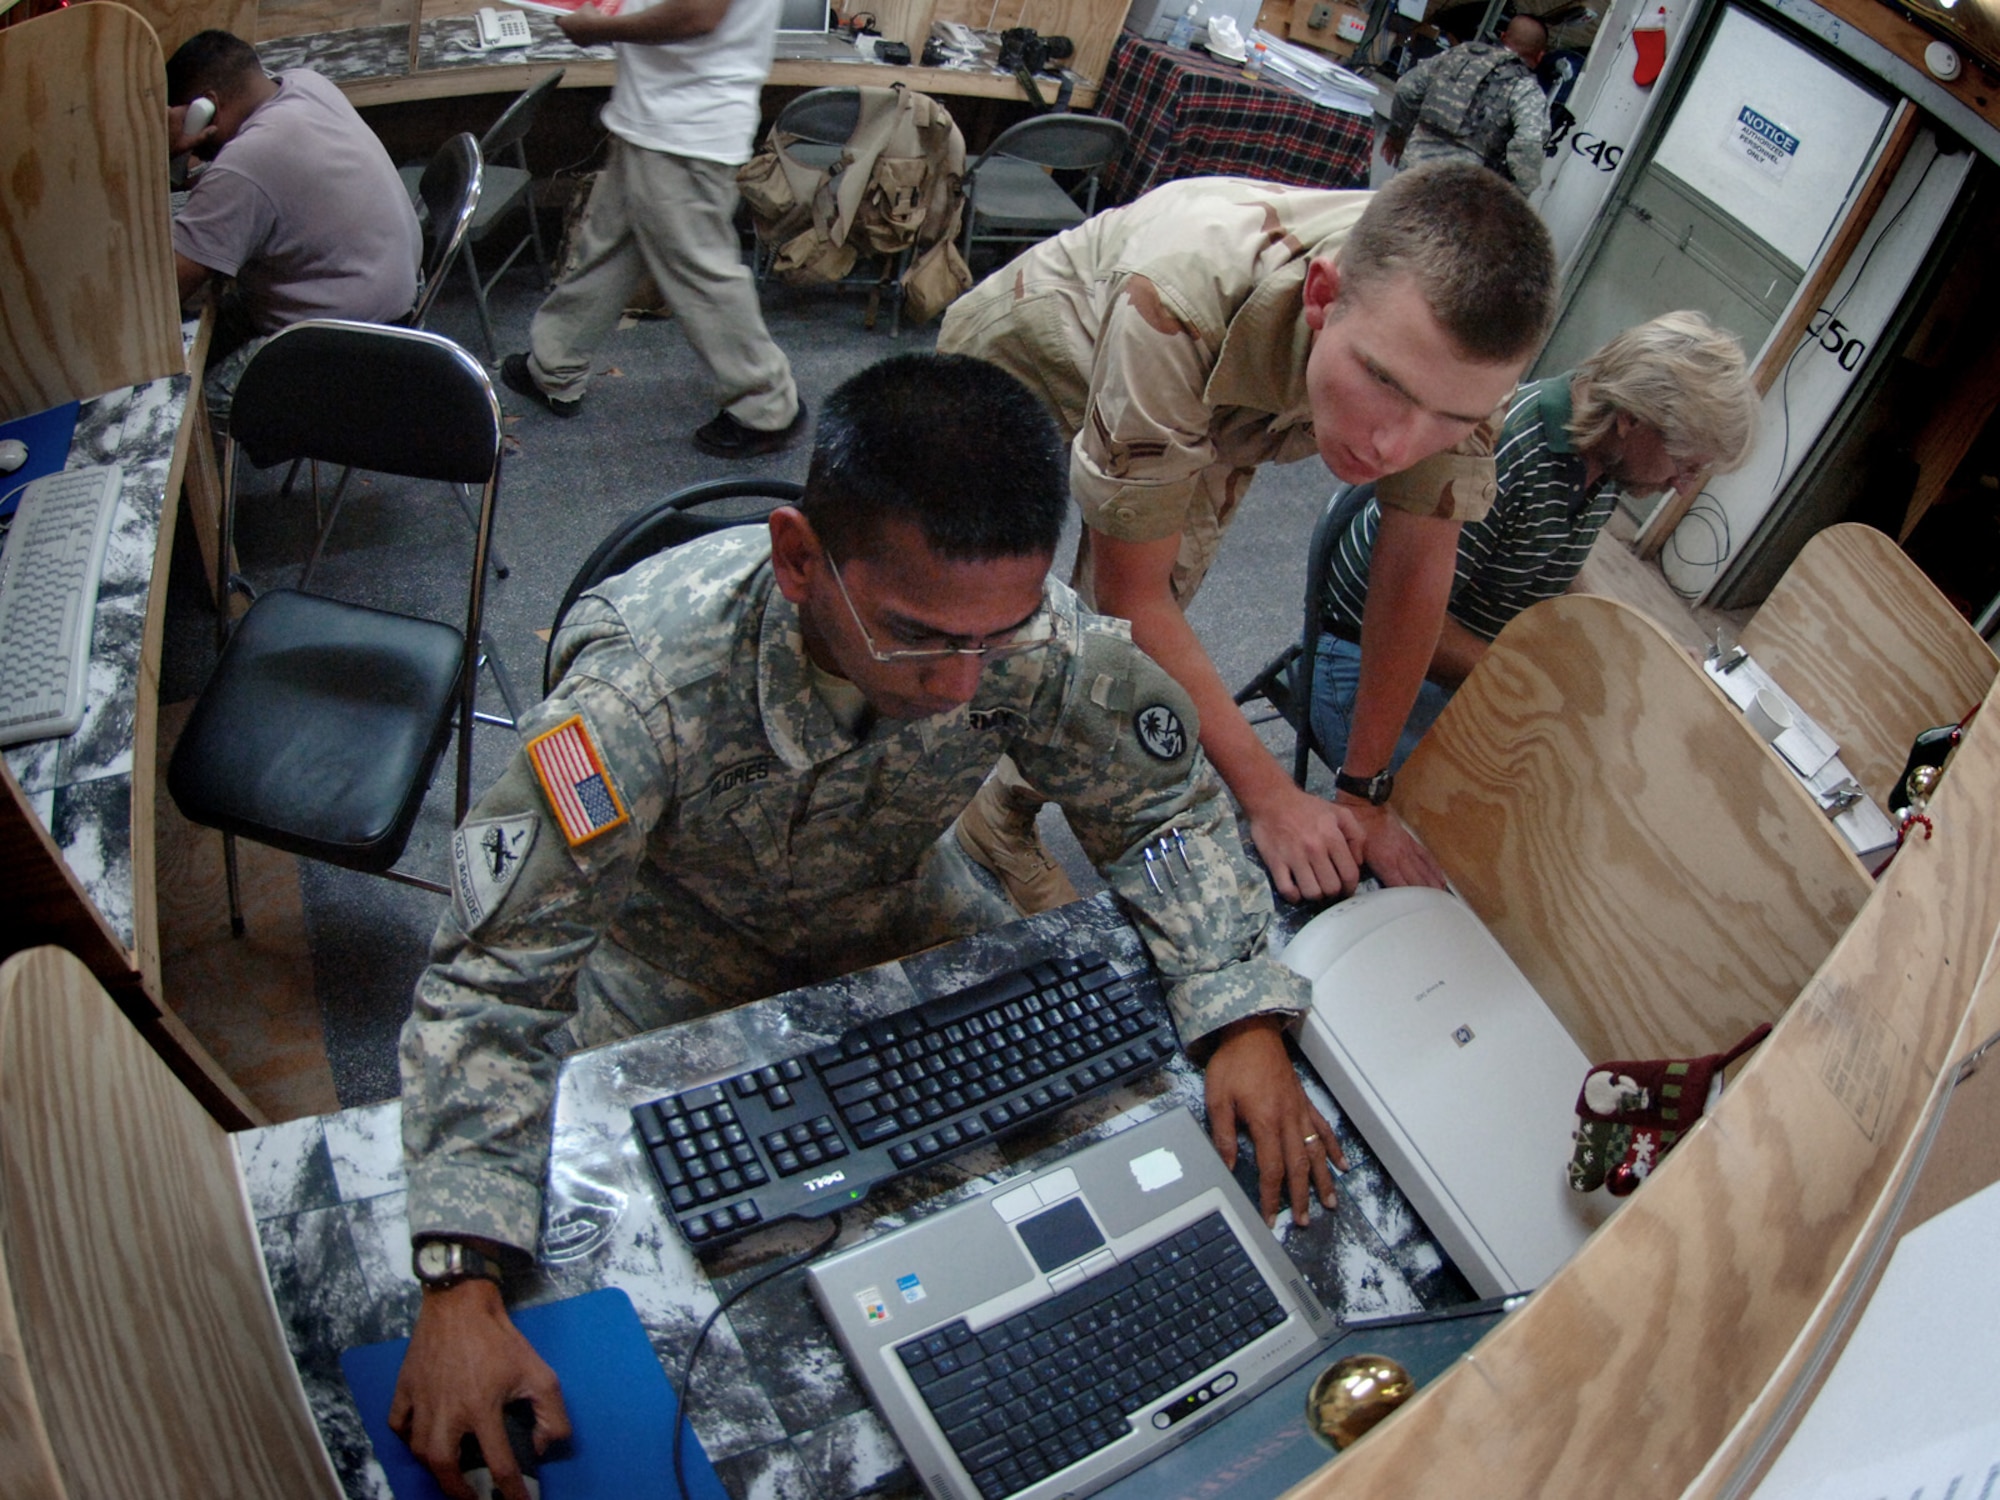 Airman 1st Class Steven Brumley, standing, troubleshoots a network connectivity problem with Guam Army National Guardsman Sergeant Patrick Flores. Both are deployed to Deployed to Contingency Operating Location Bilate, Ethiopia. (U.S. Air Force photo/Master Sgt. Scott Wagers)

